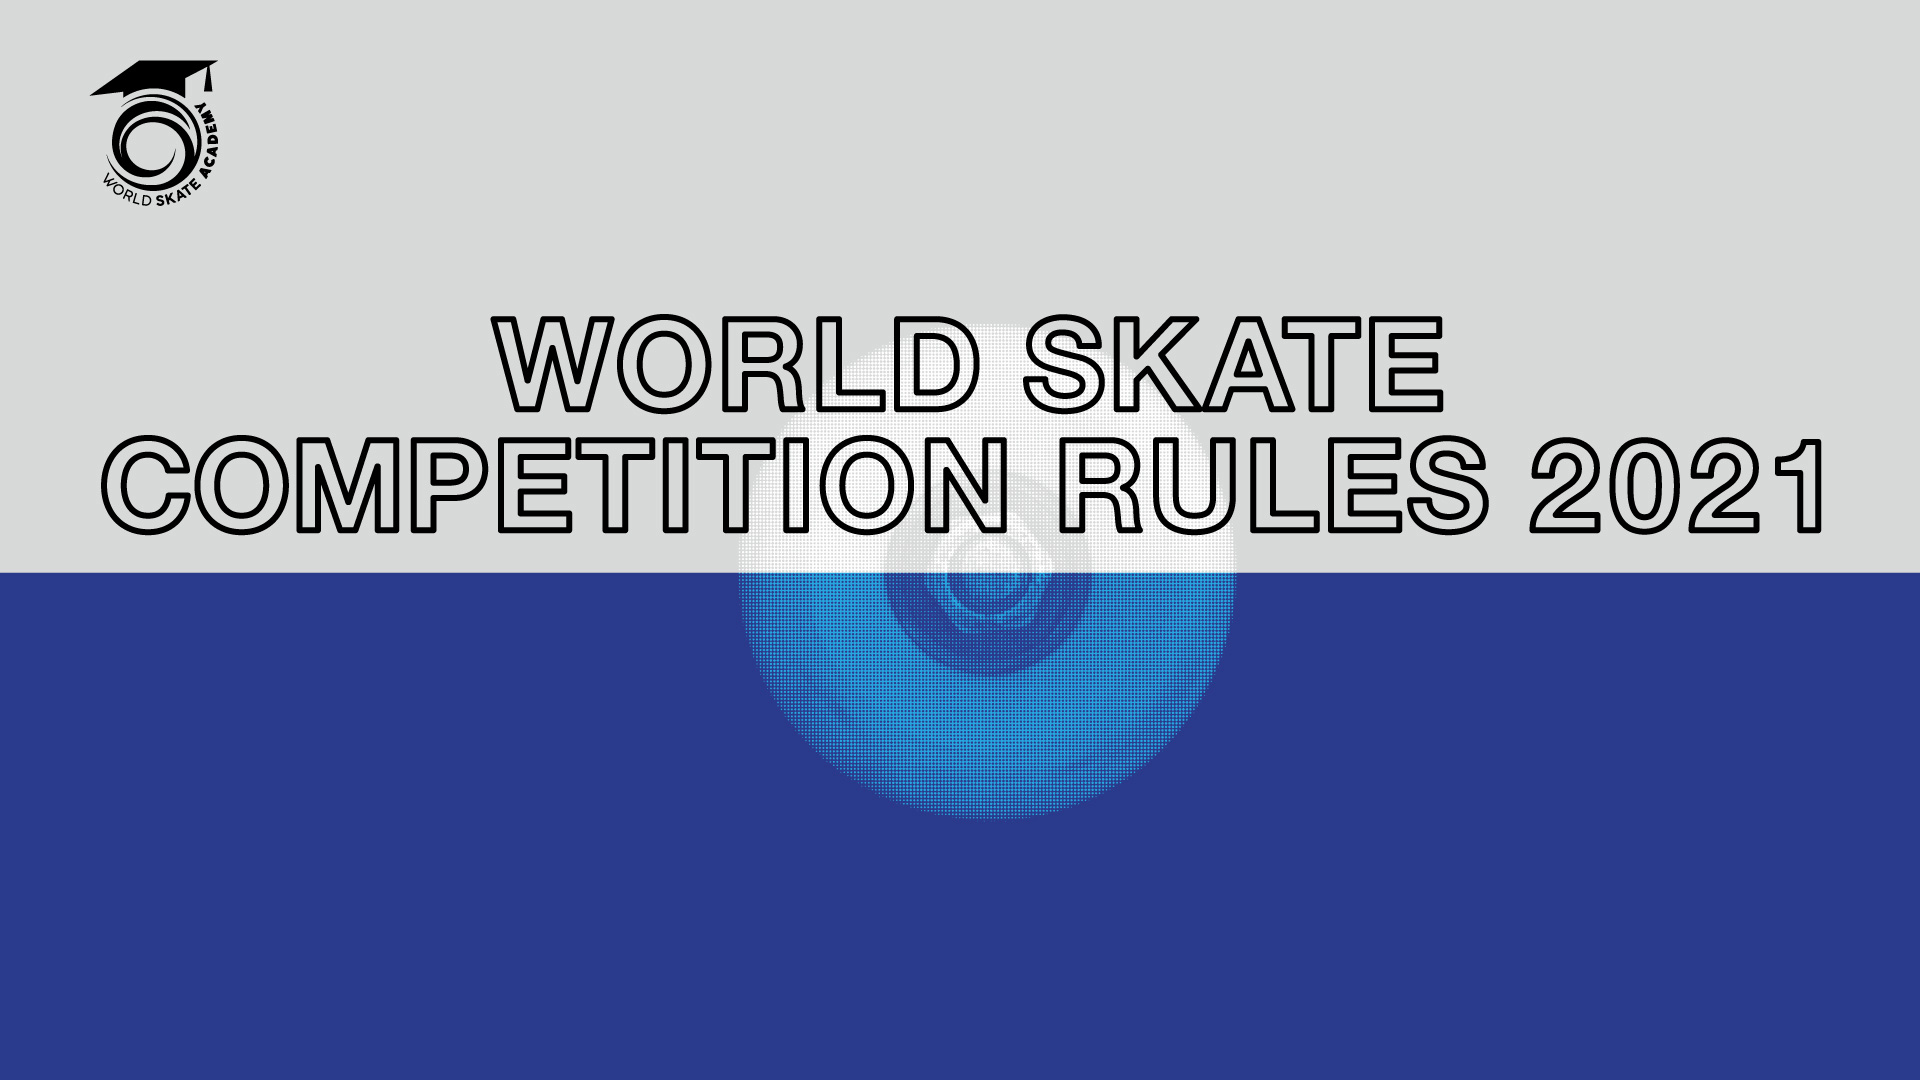 Competition rules. World Skate. Рrо вrаdоs Аir САRВОN Skаtе Wоrld сuр 2024.